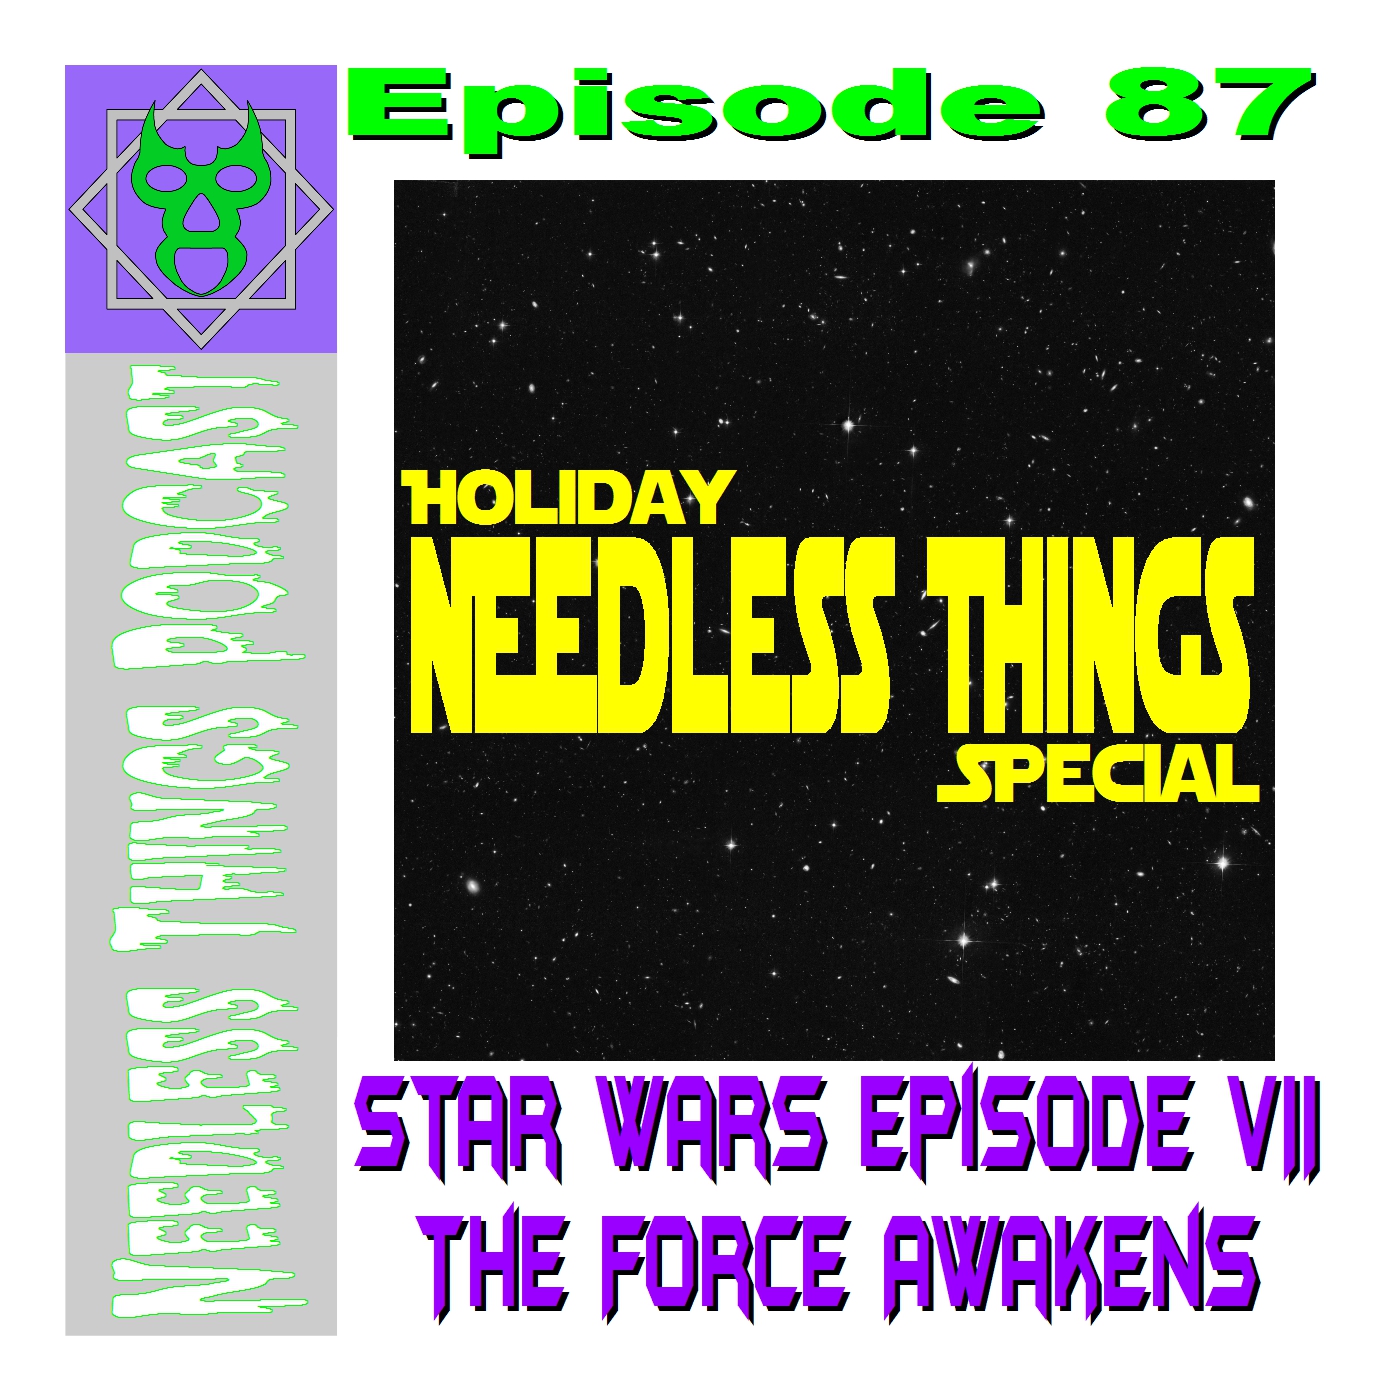 Needless Things Podcast 87 – Star Wars Episode VII: The Force Awakens